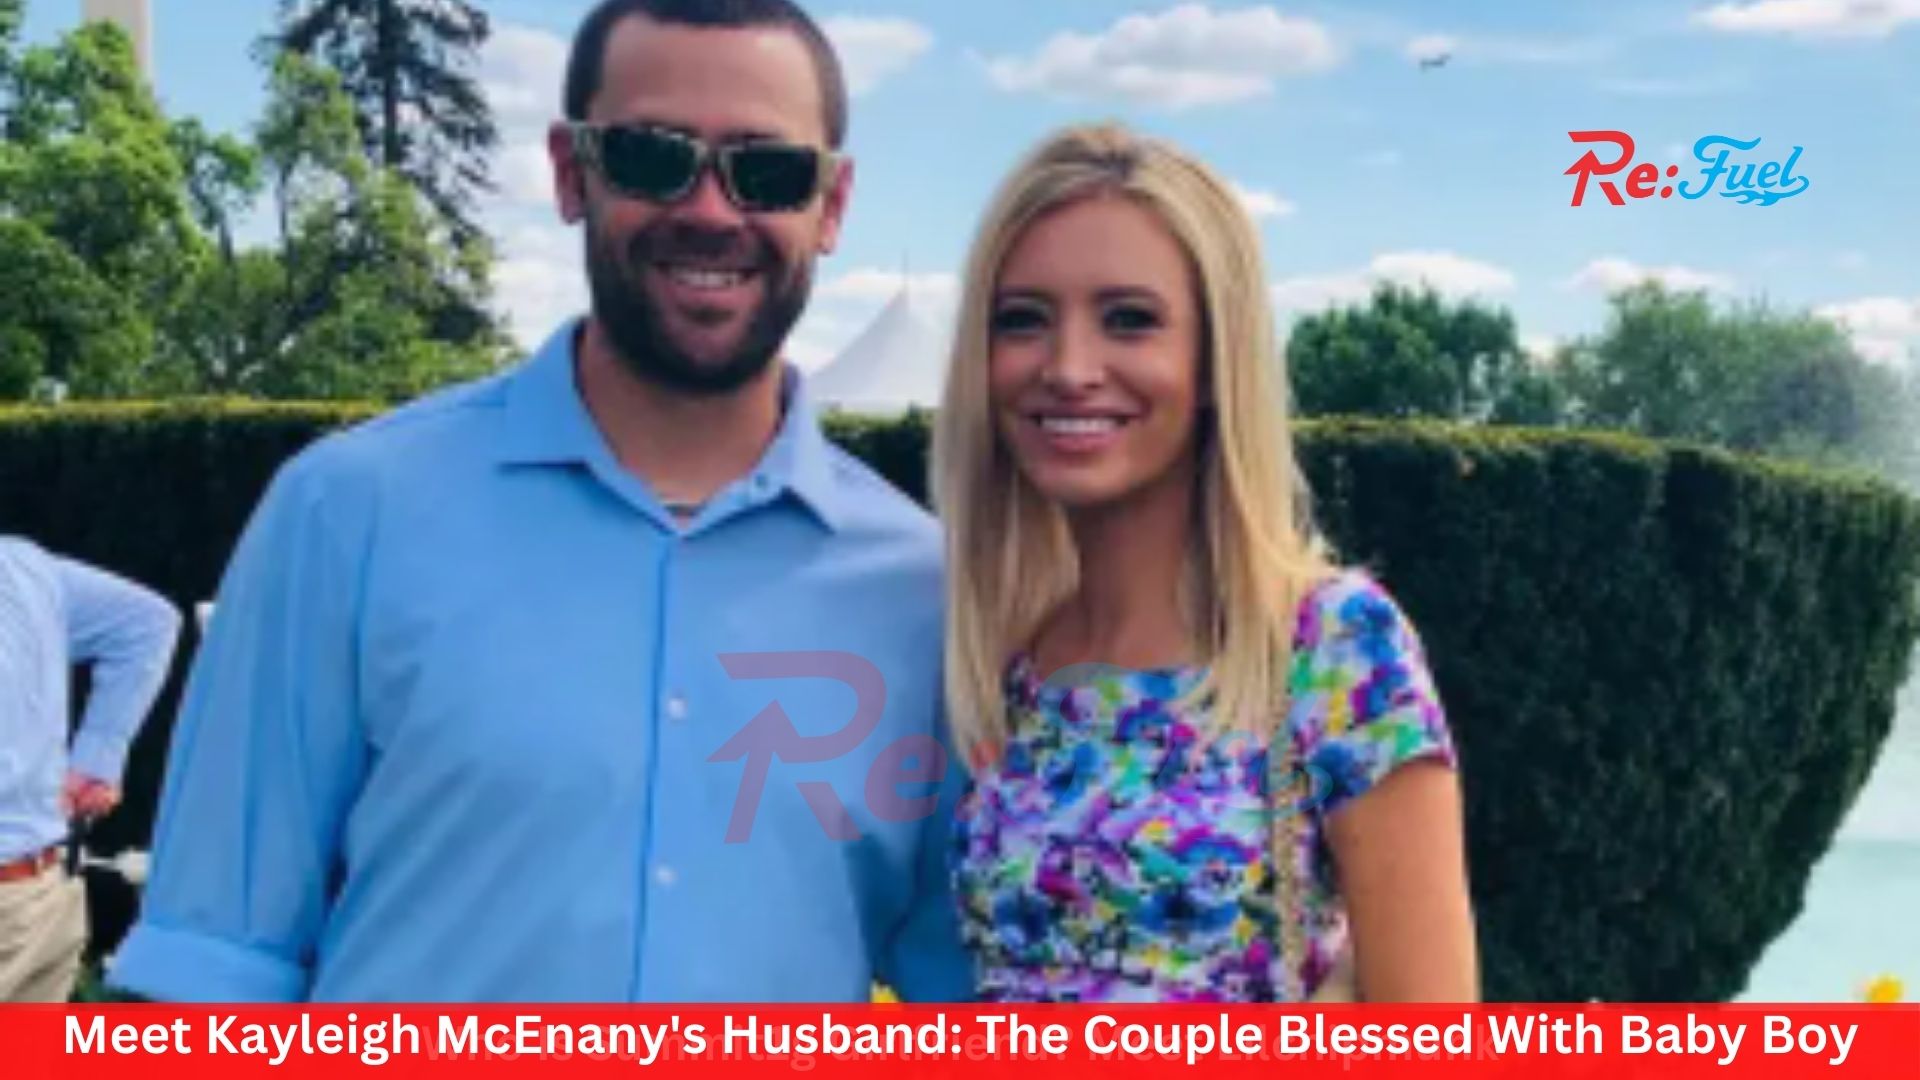 Meet Kayleigh McEnany's Husband: The Couple Blessed With Baby Boy